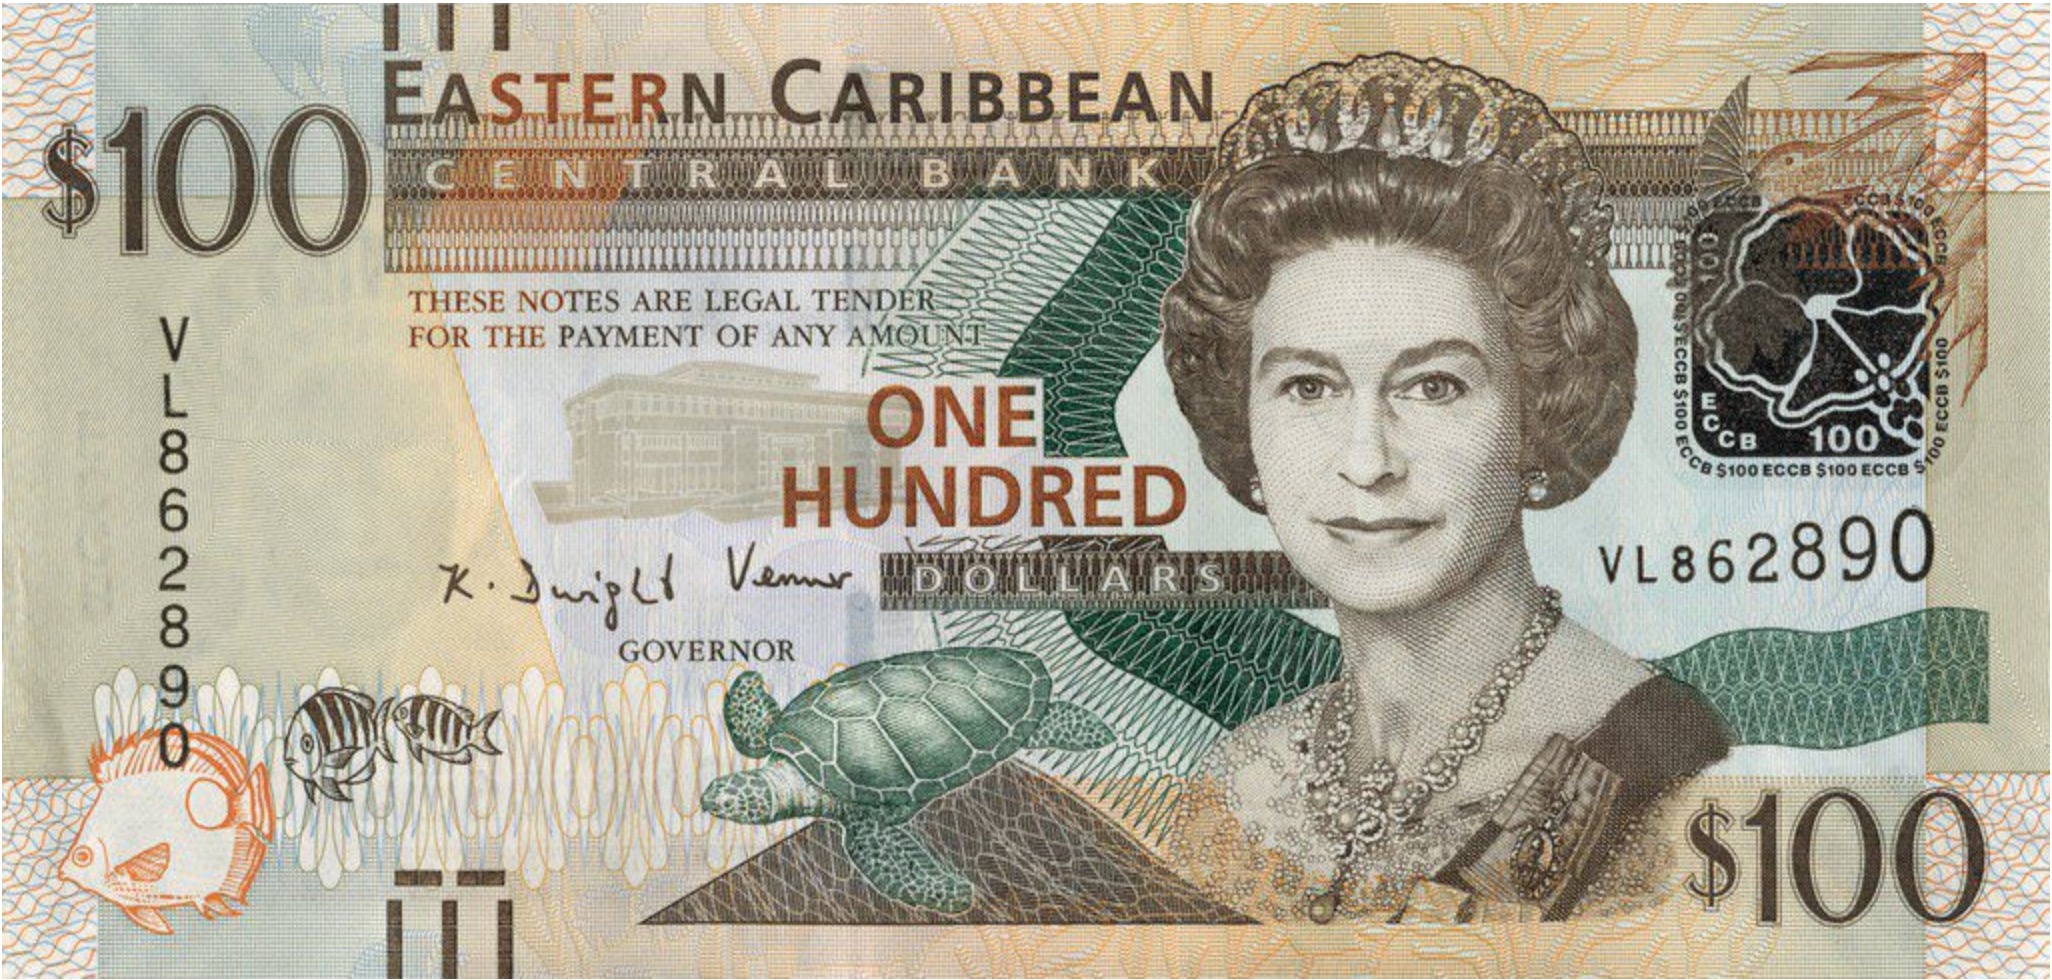 100 Eastern Caribbean dollars banknote (improved security features)